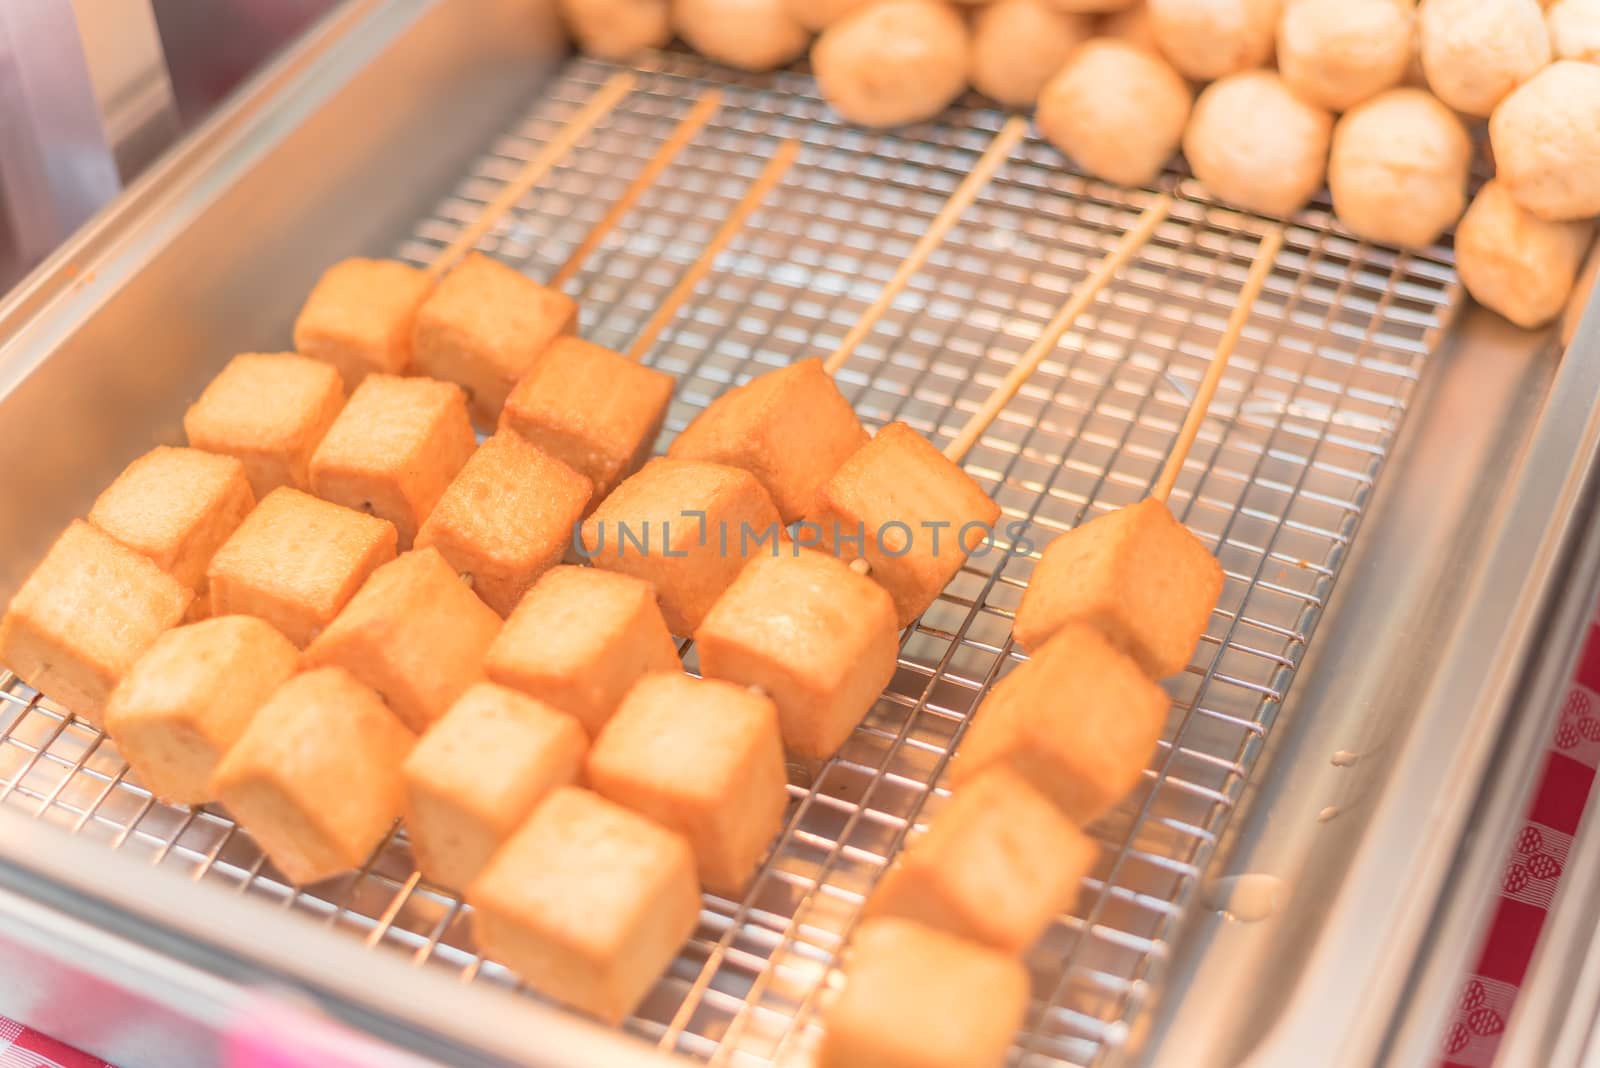 Close-up, selective focus of skewers with fried tofu cubes at farmer market stand in America. Tofu breaded, vegetarian food